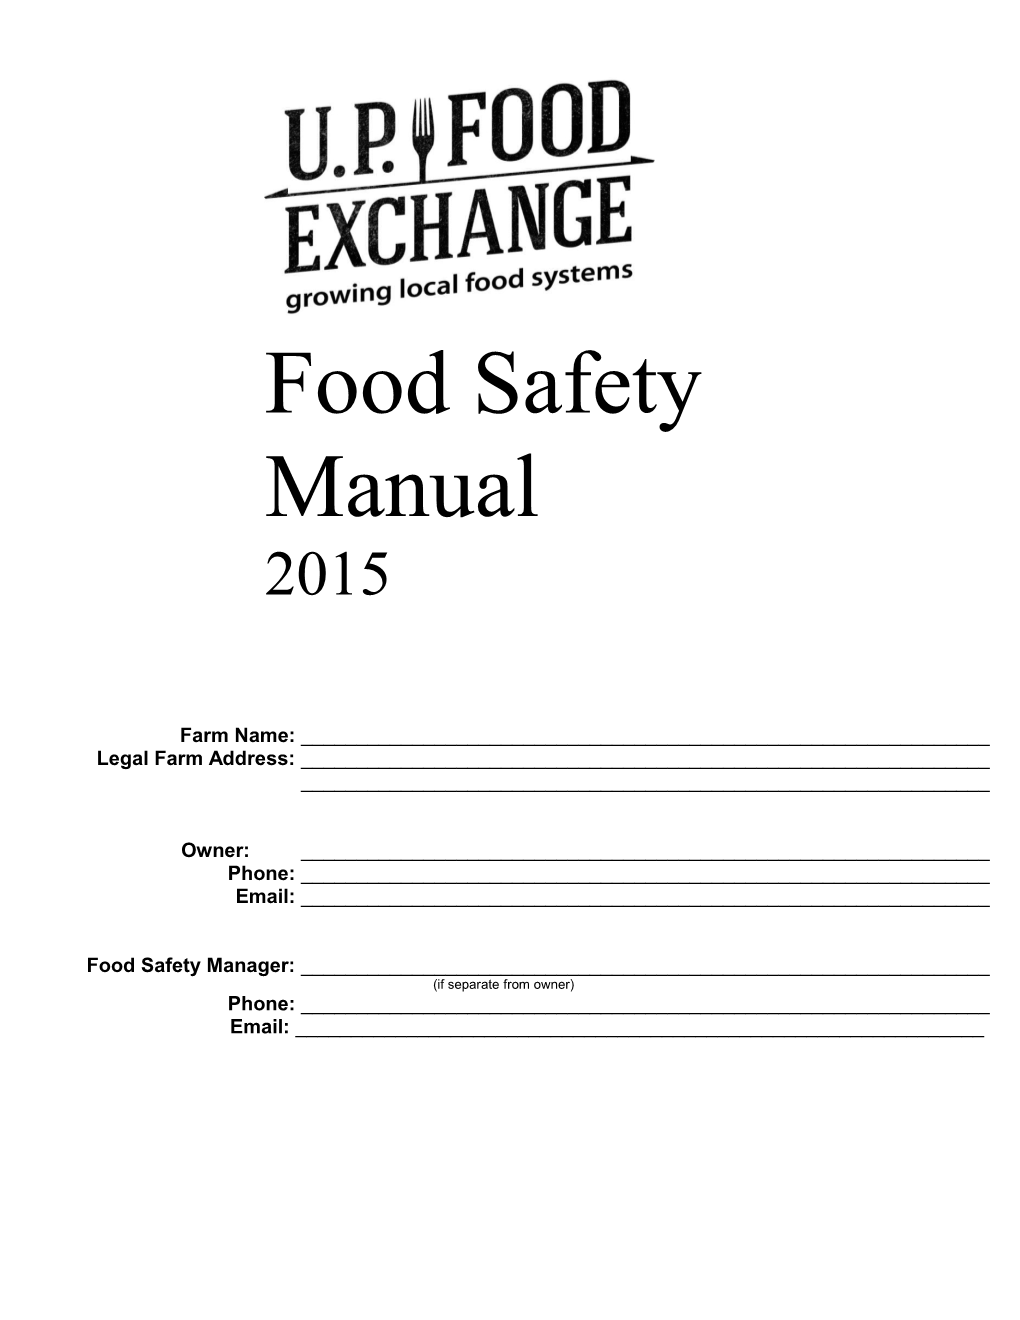 Food Safety Manual